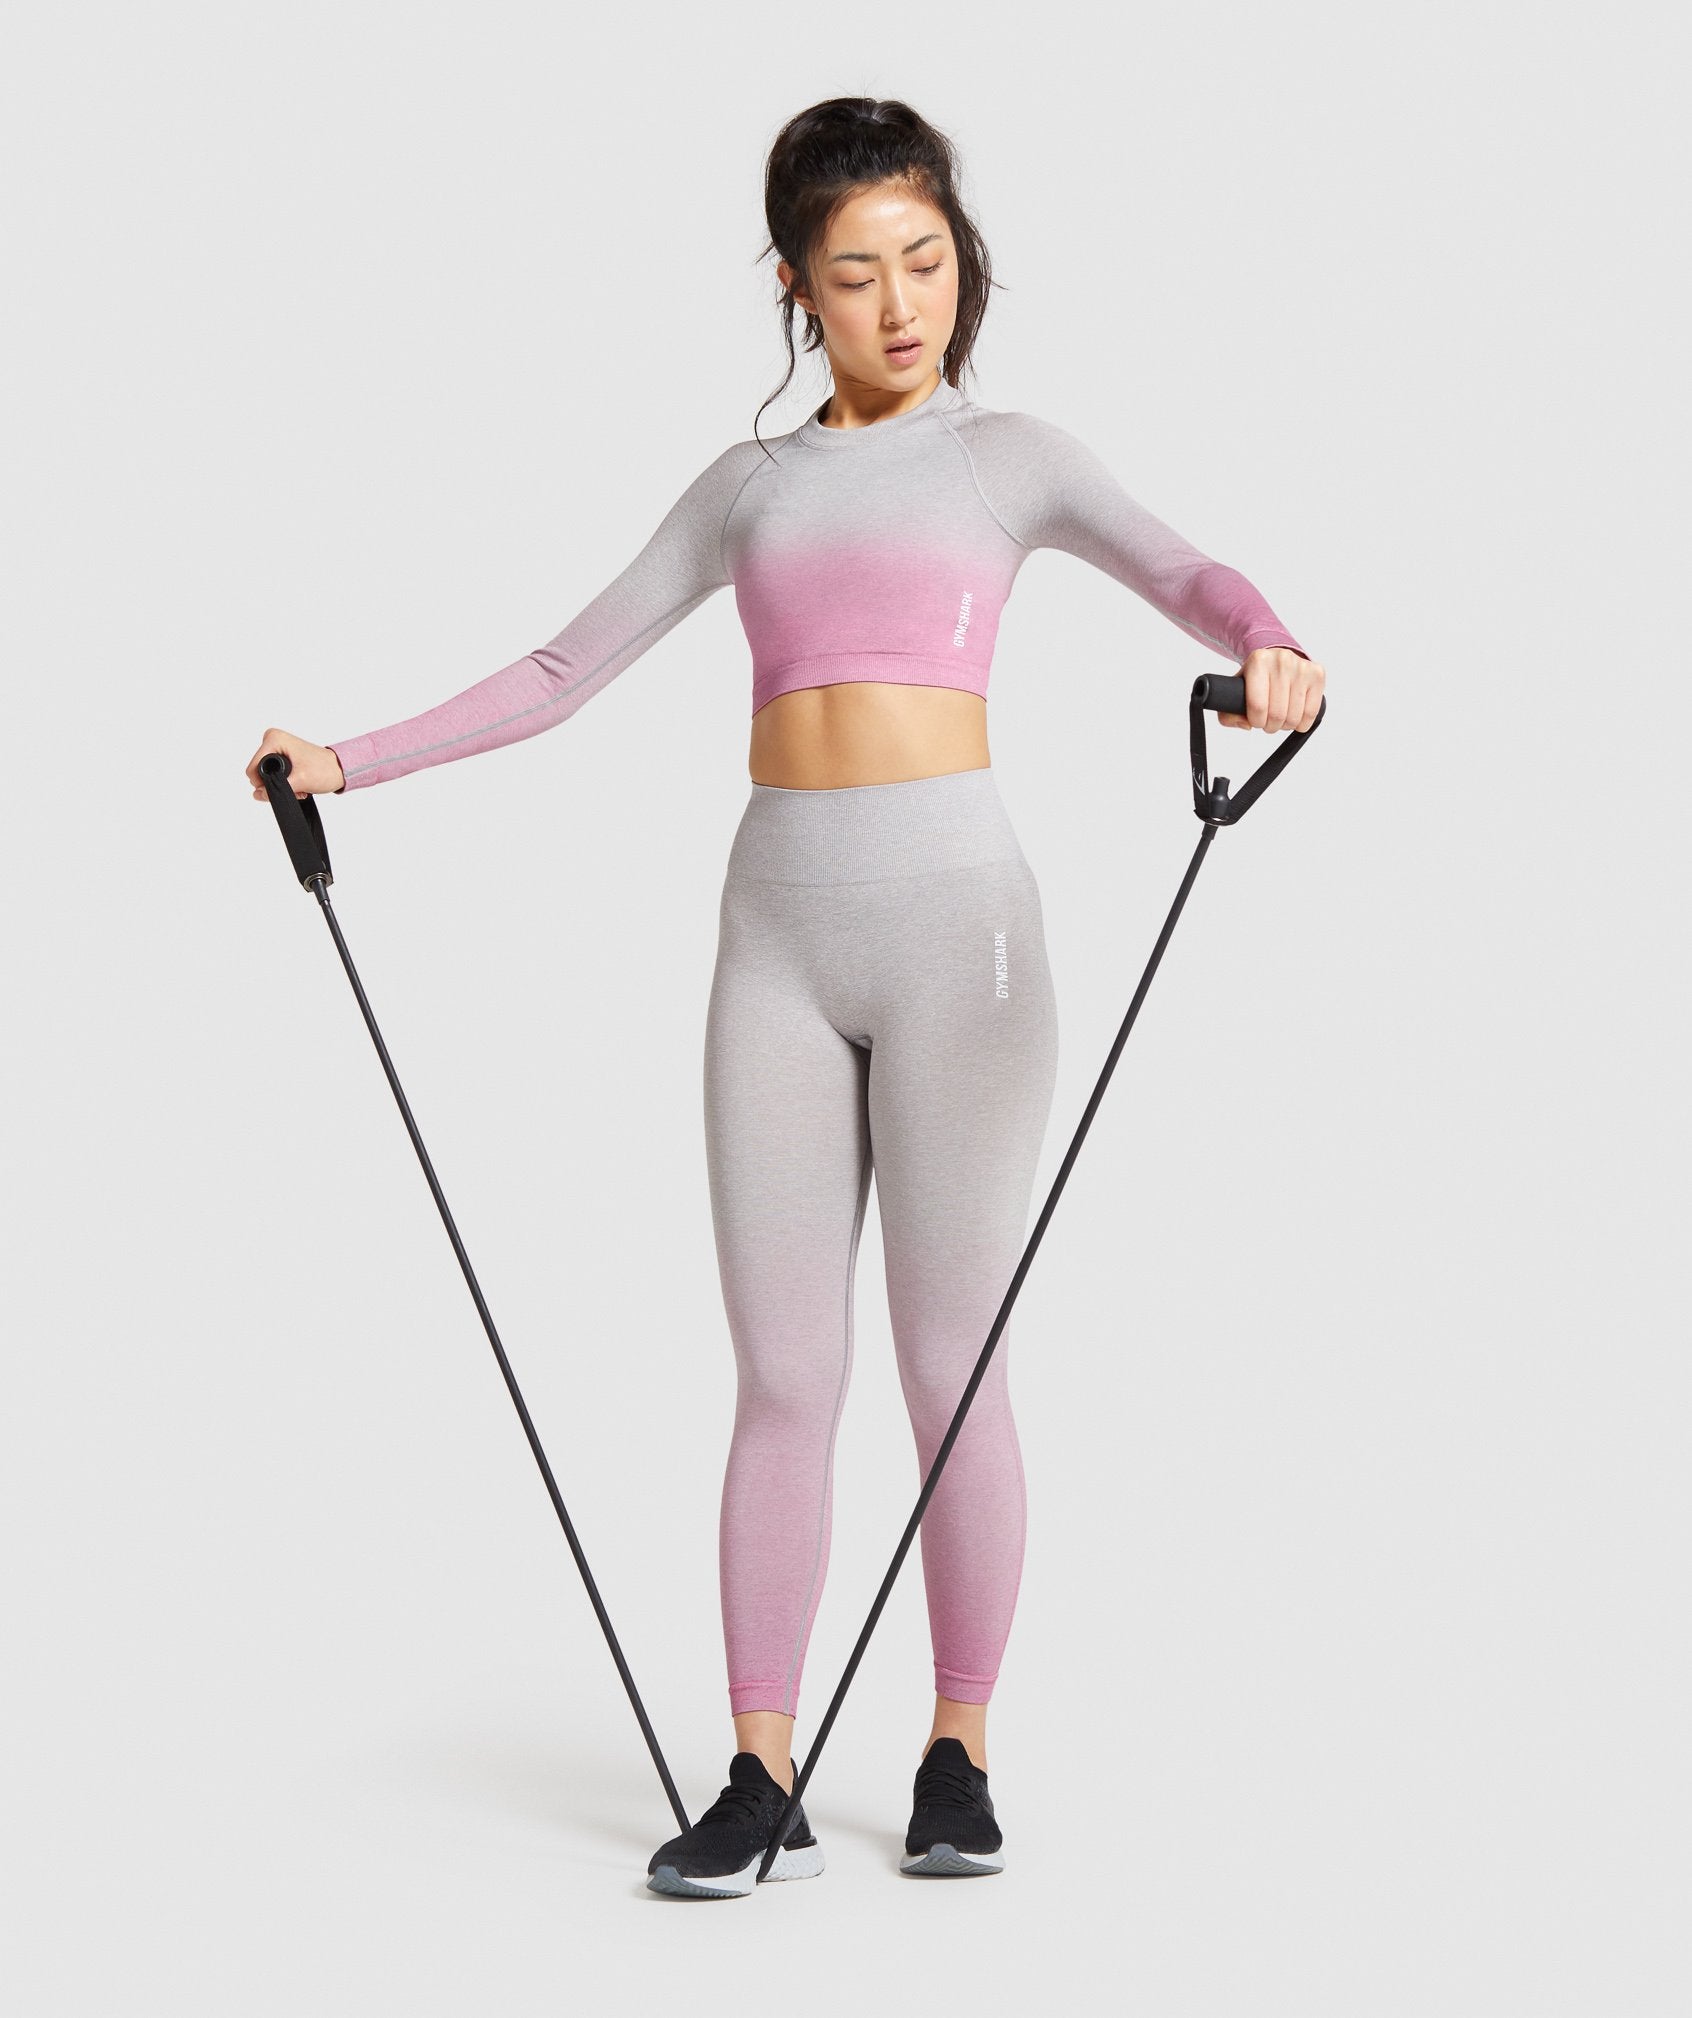 Adapt Ombre Seamless Long Sleeve Crop Top in Light Grey Marl/Pink